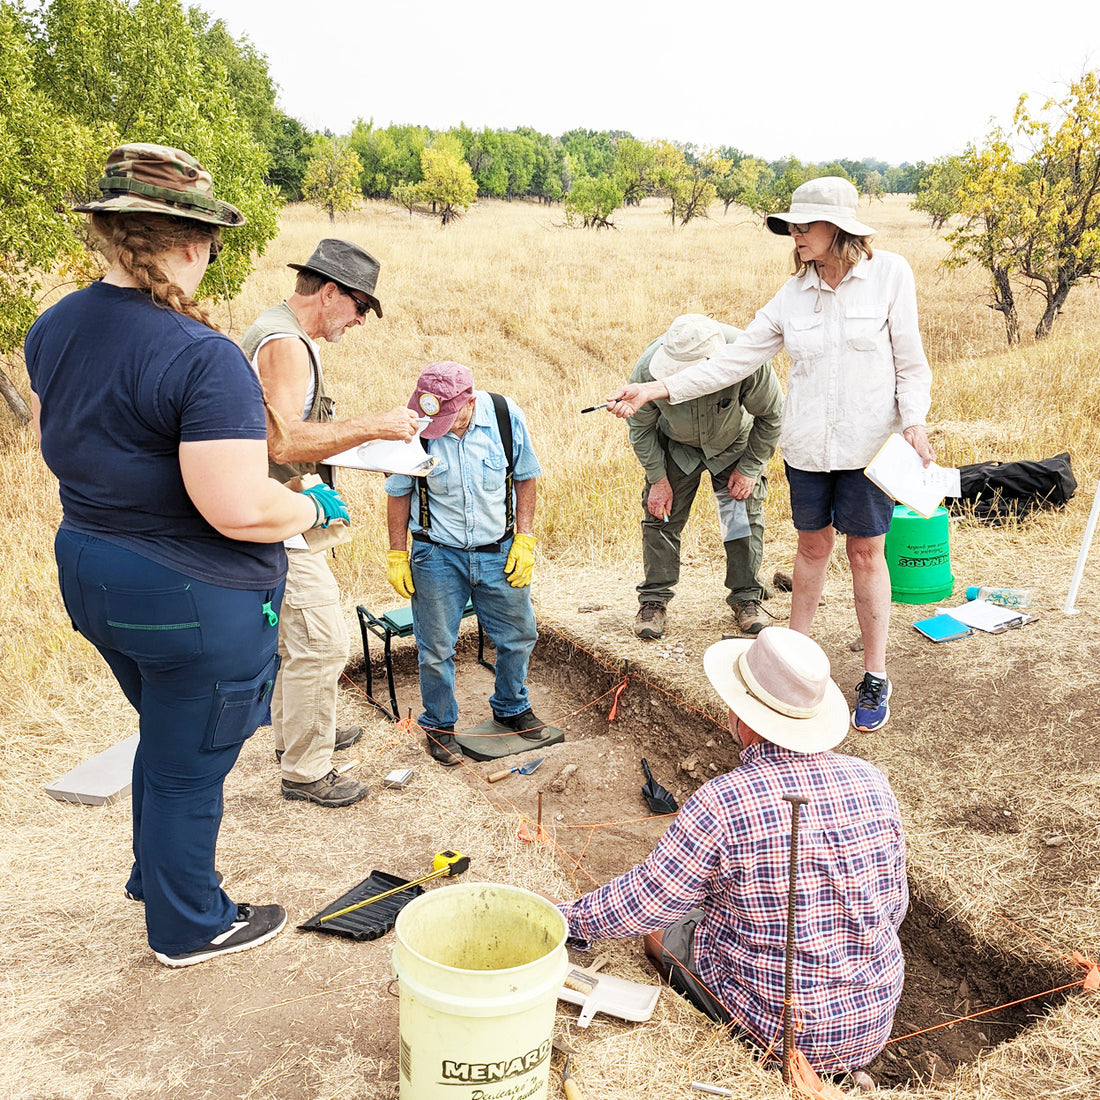 Join Us on this Archaeology Dig!